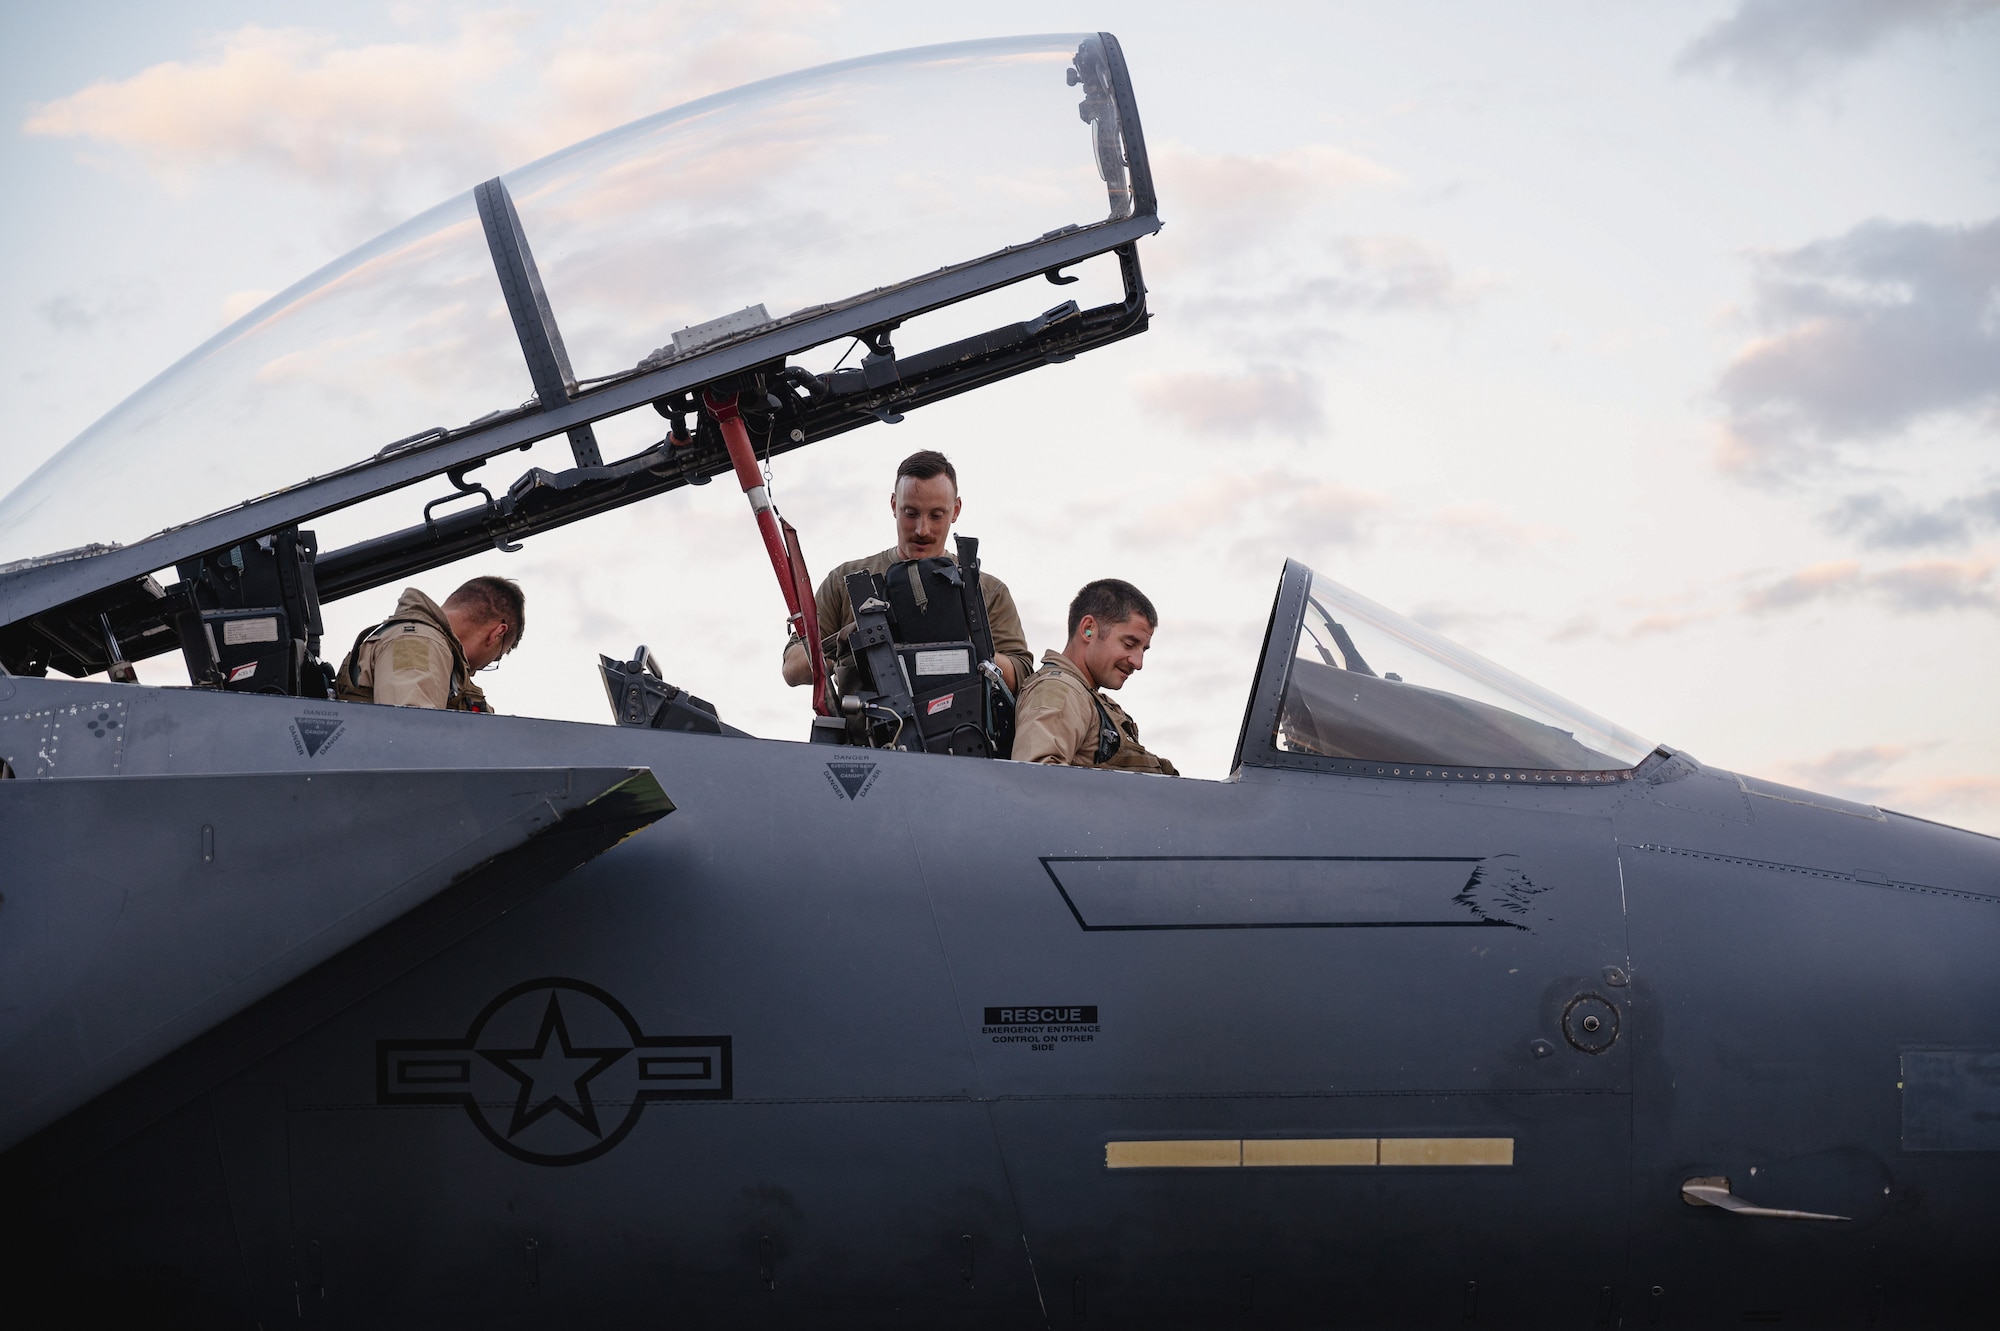 Airmen from the 389th Expeditionary Fighter Squadron prepare an F-15E Strike Eagle fighter jet for takeoff during the “Maintainer for a Day” program at an undisclosed location, Nov. 10, 2022. Maintainer for a Day is an initiative that pairs Airmen across a variety of career fields with members of aircraft maintenance shops for a hands-on learning experience with F-15E Strike Eagle fighter jets. (U.S. Air Force photo by Tech. Sgt. Richard Mekkri)